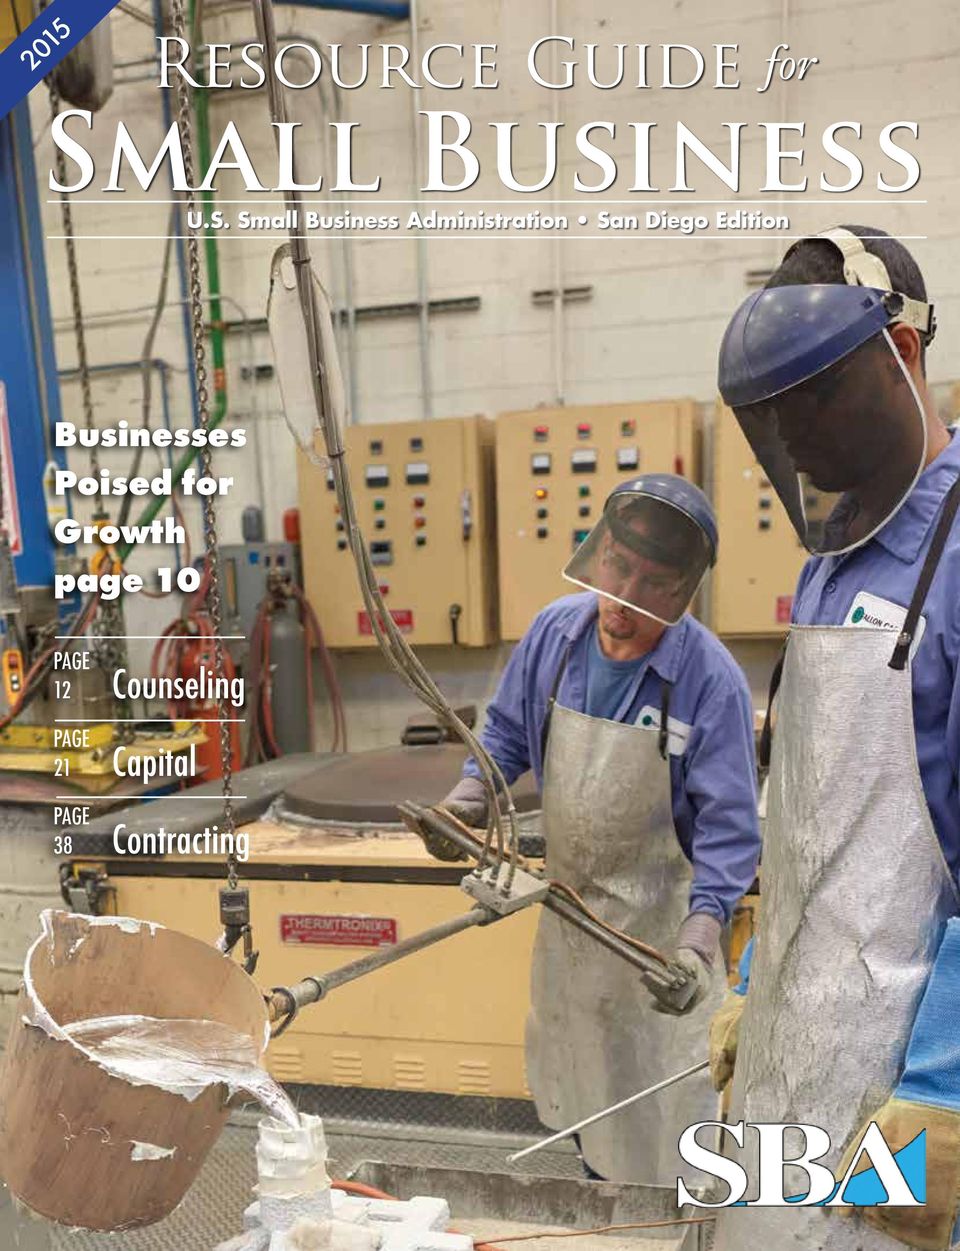 Small Business Administration San Diego